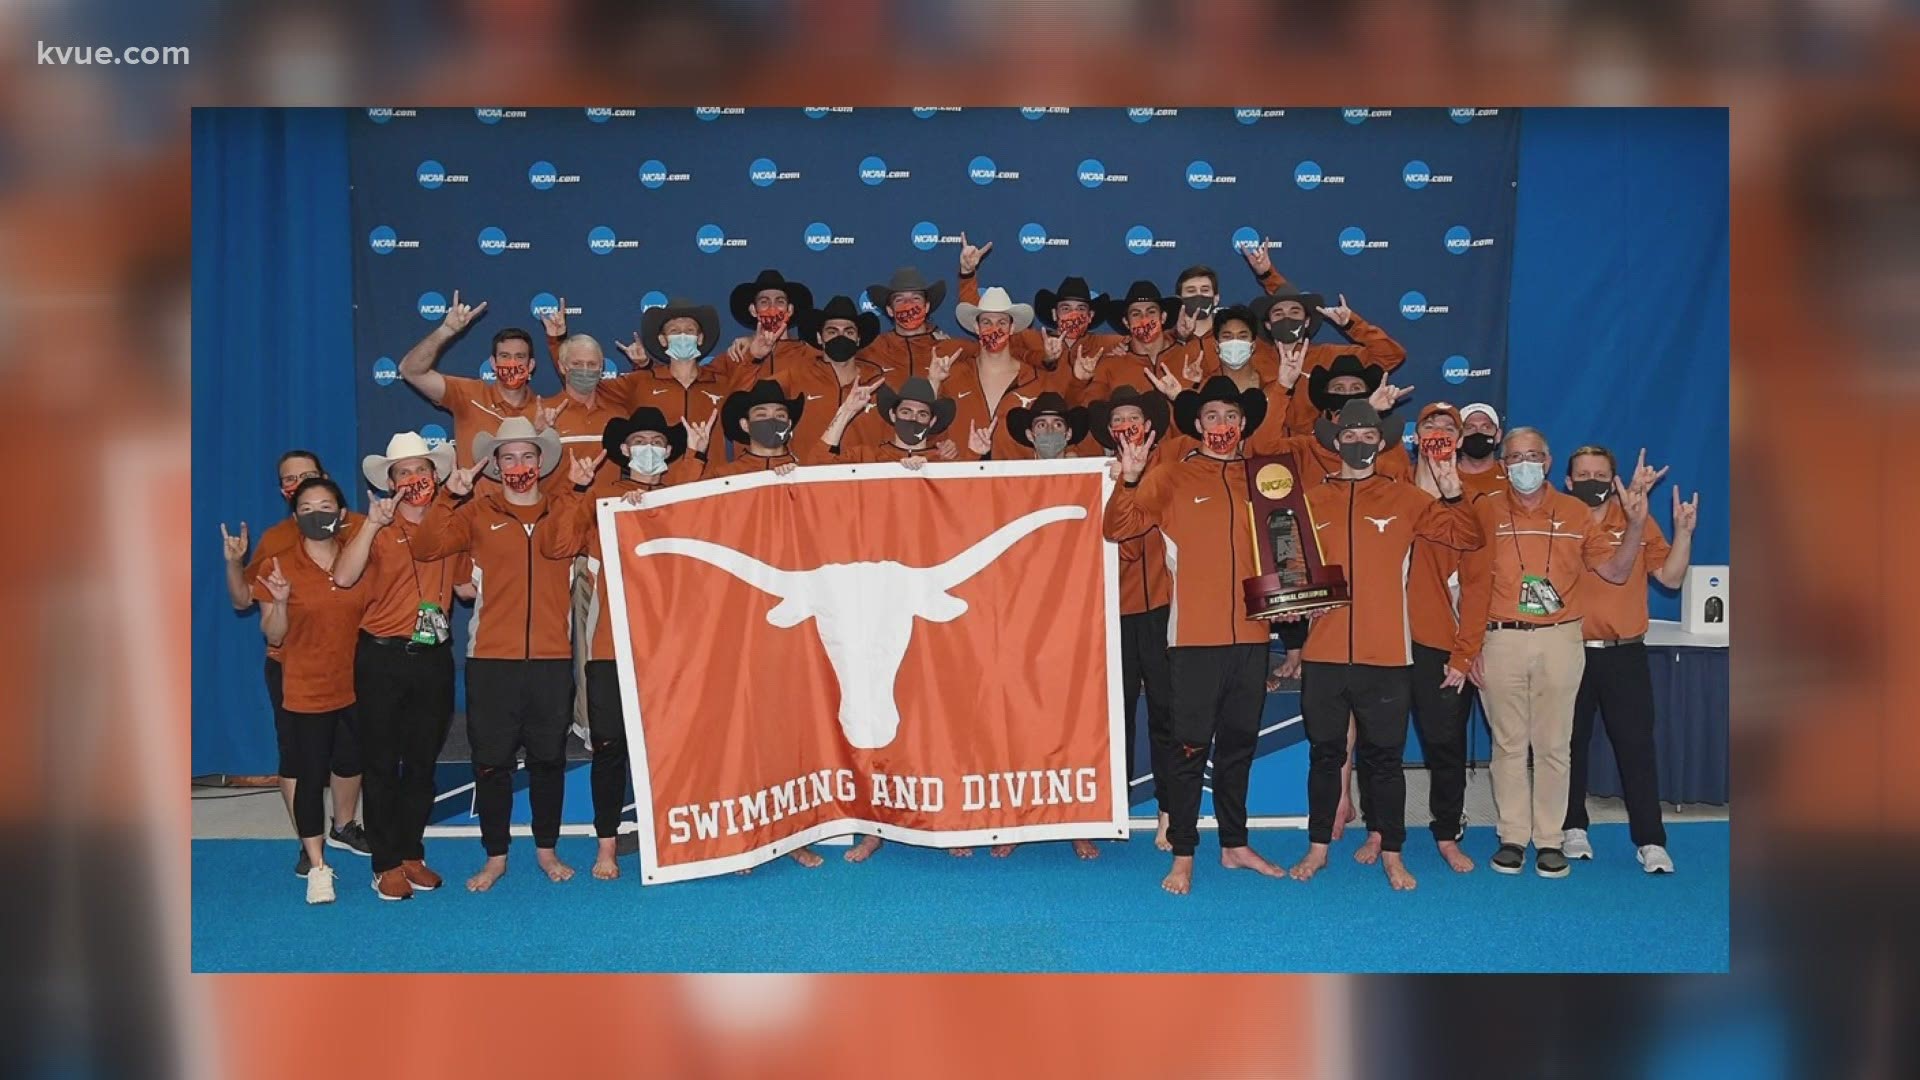 The Longhorns earned their NCAA-best 15th national title in program history.